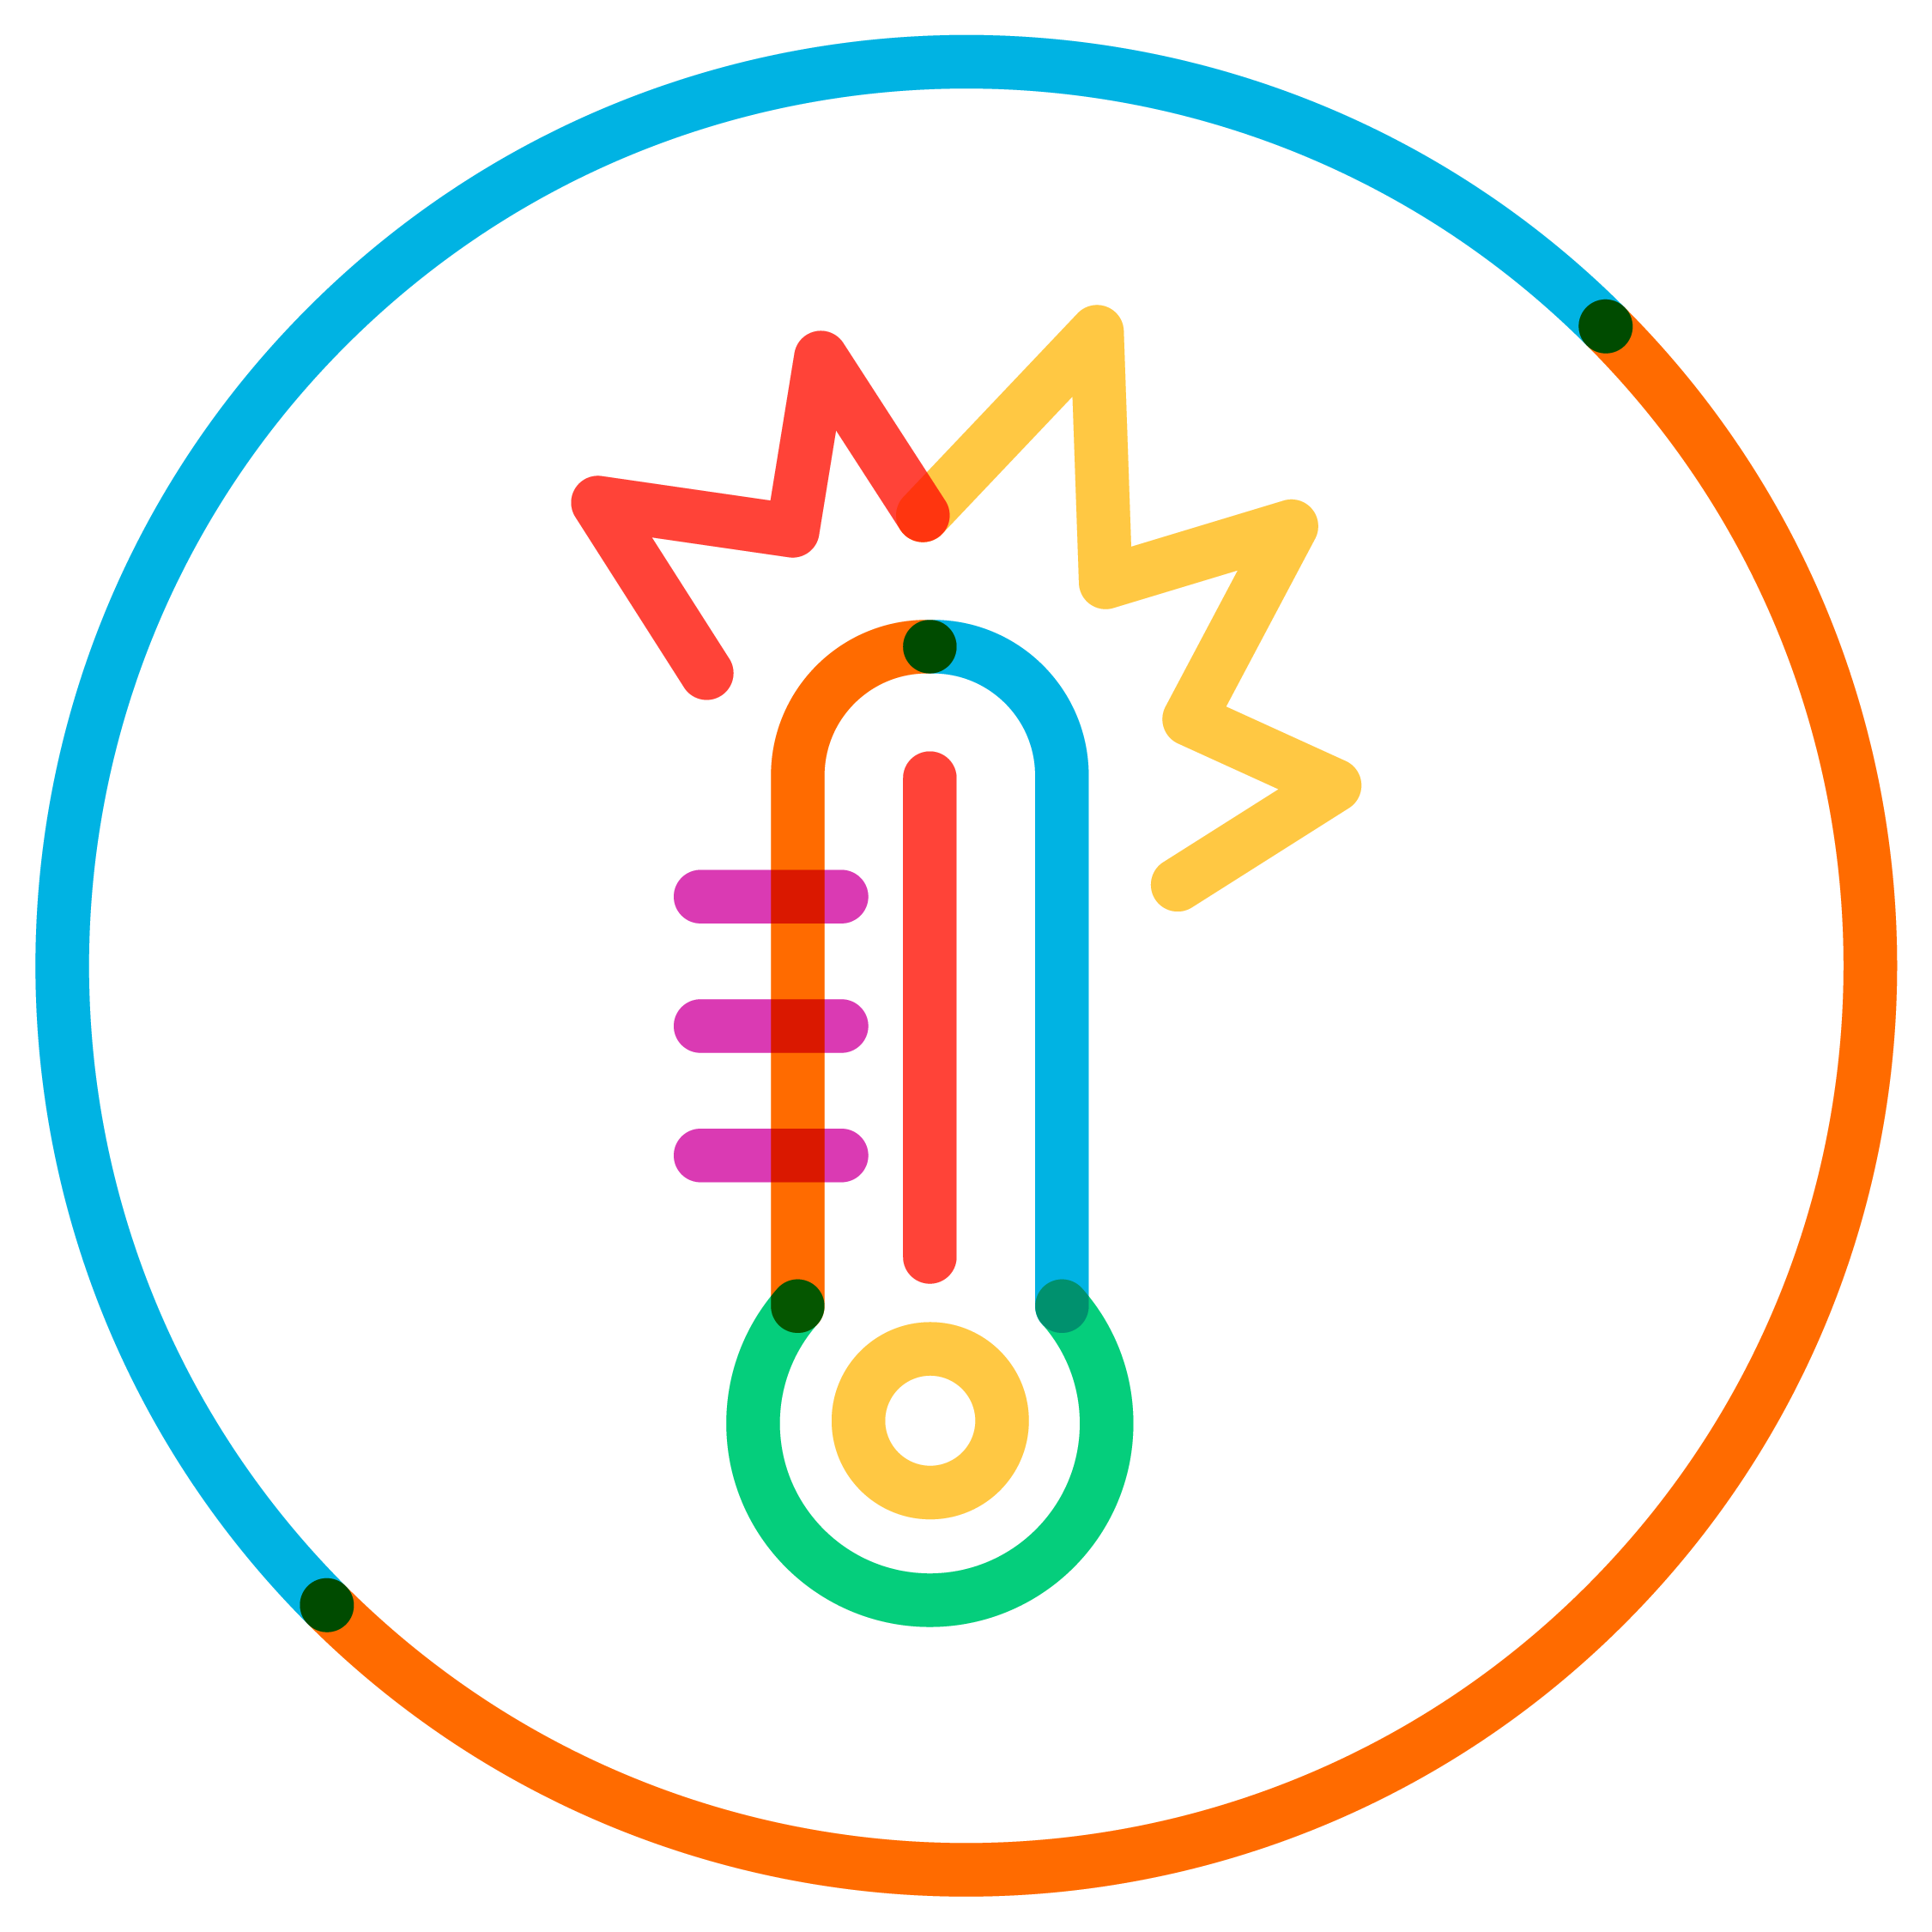 Multicolored line drawing illustration of a thermometer